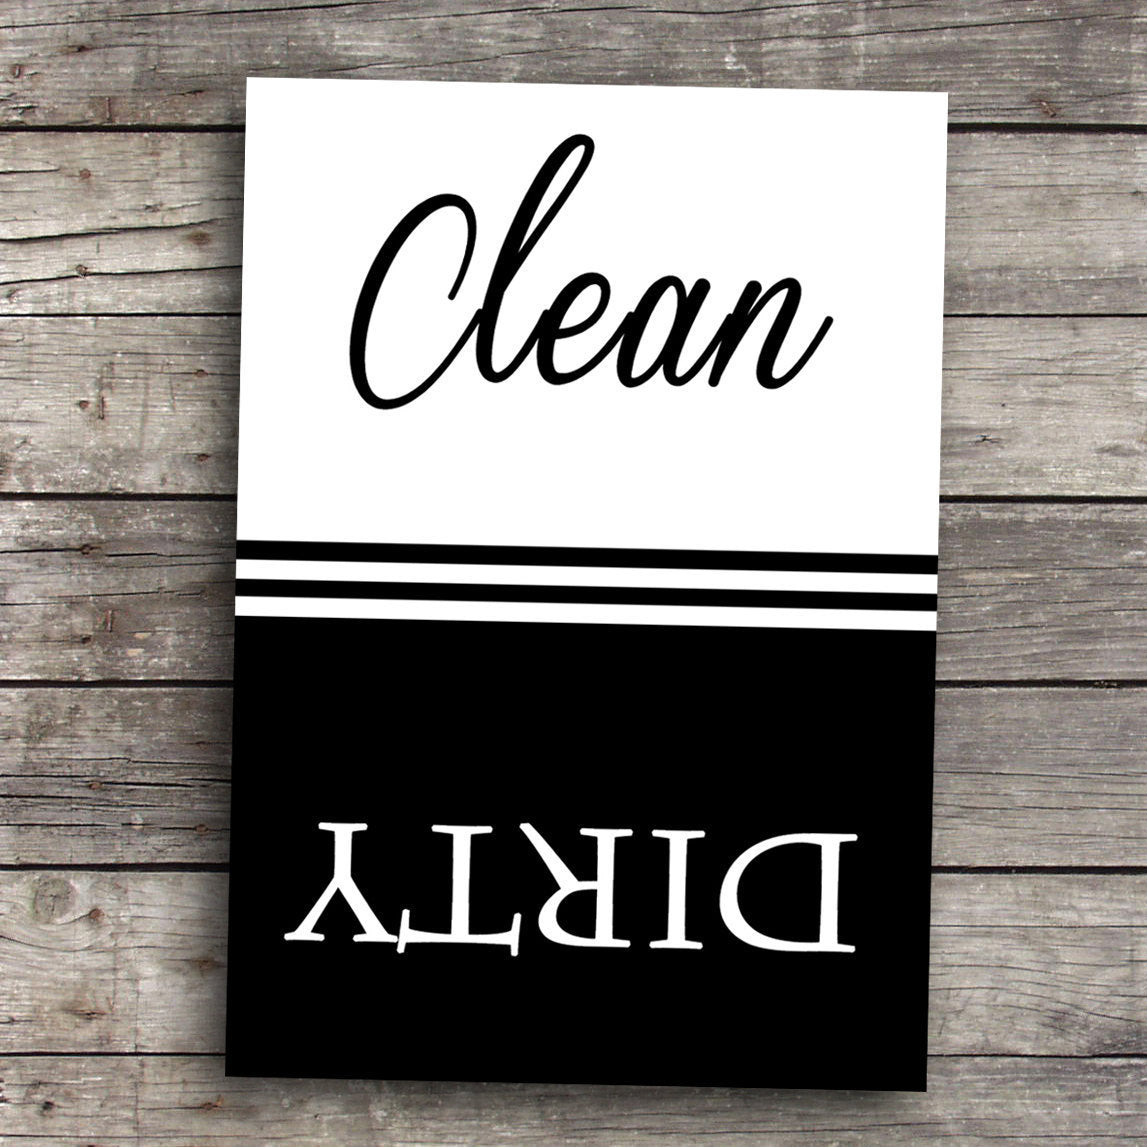 Clean Dirty Dishwasher Magnet – Forget Me Not Magnets